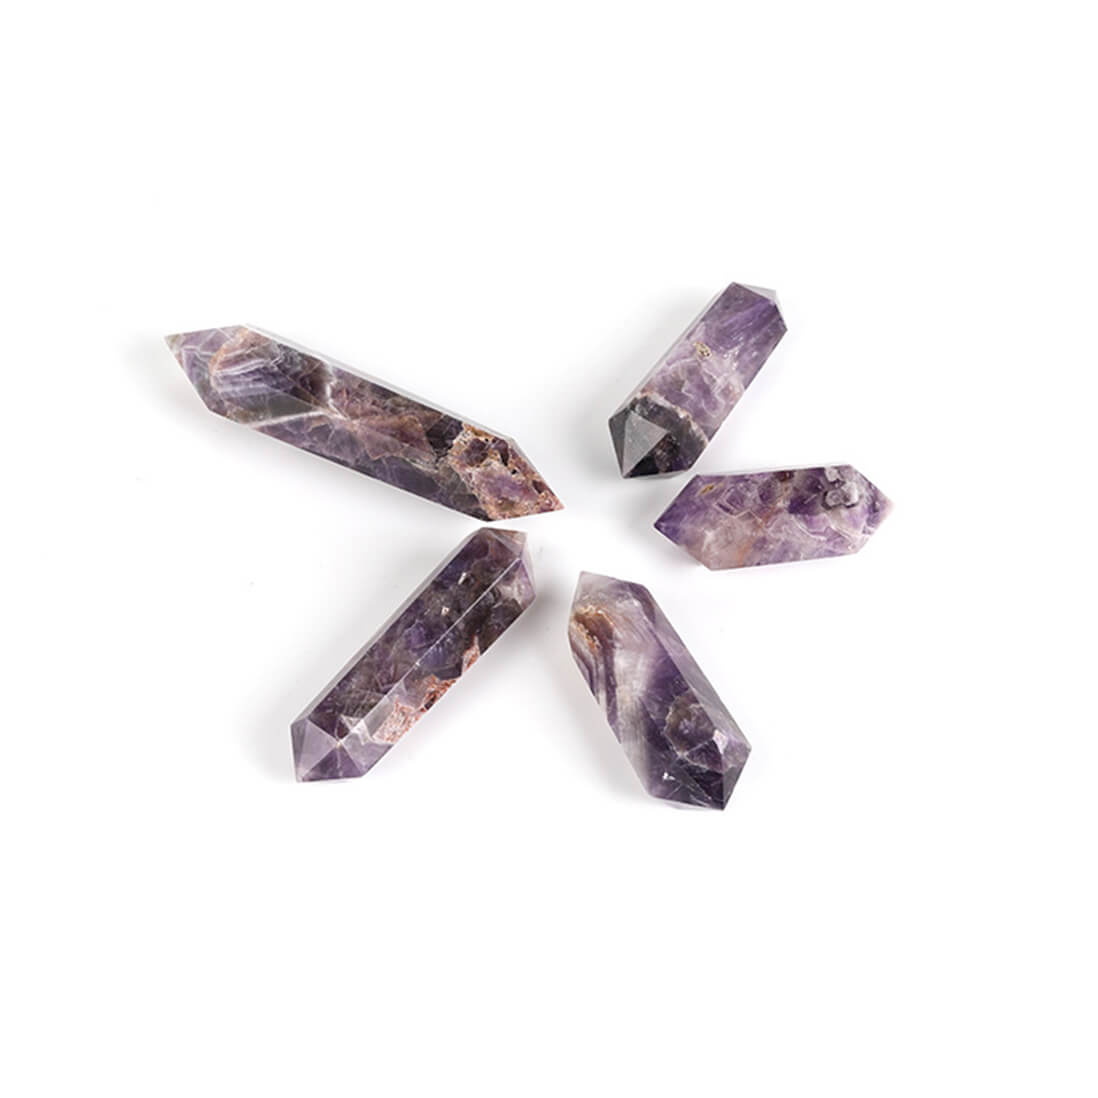 Chevron Amethyst Double Point Crystal Towers - 5 to 9 cm